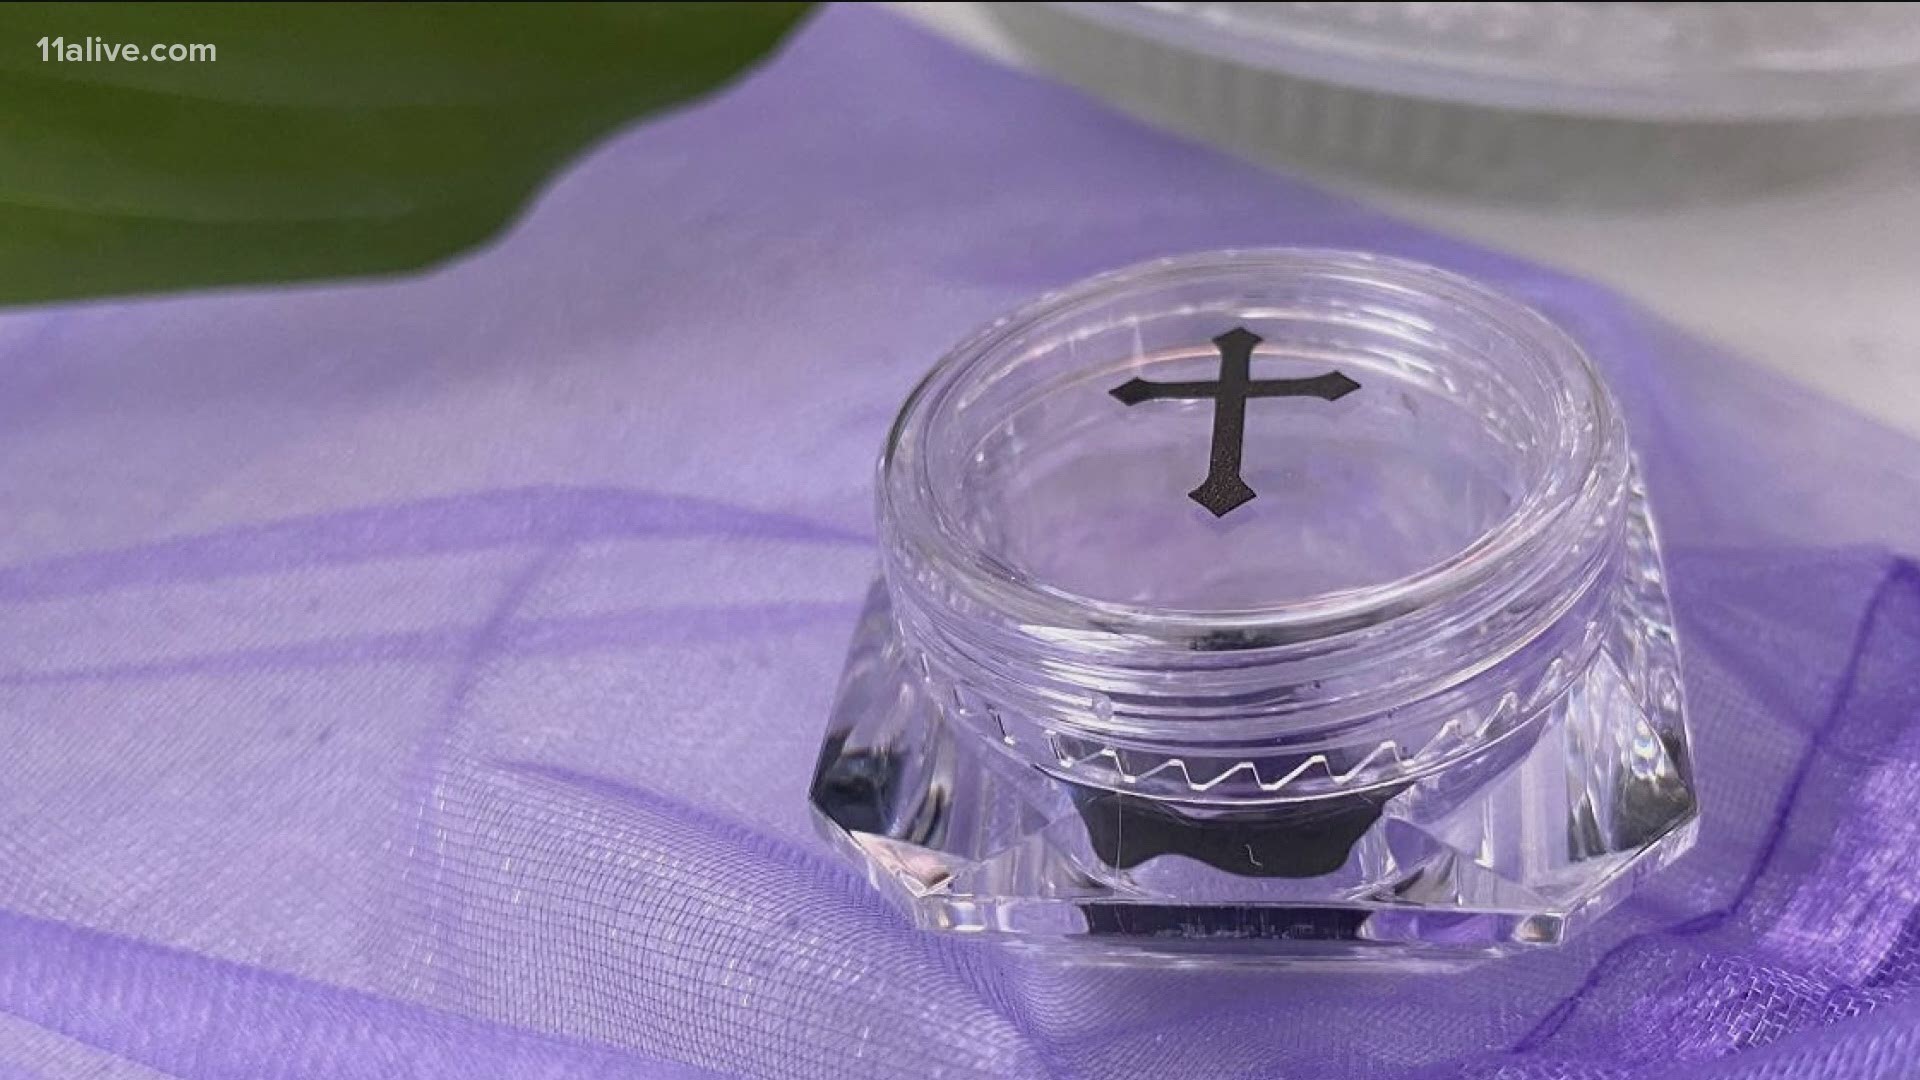 Local churches are making sure church-goers can still get their ashes while staying safe.